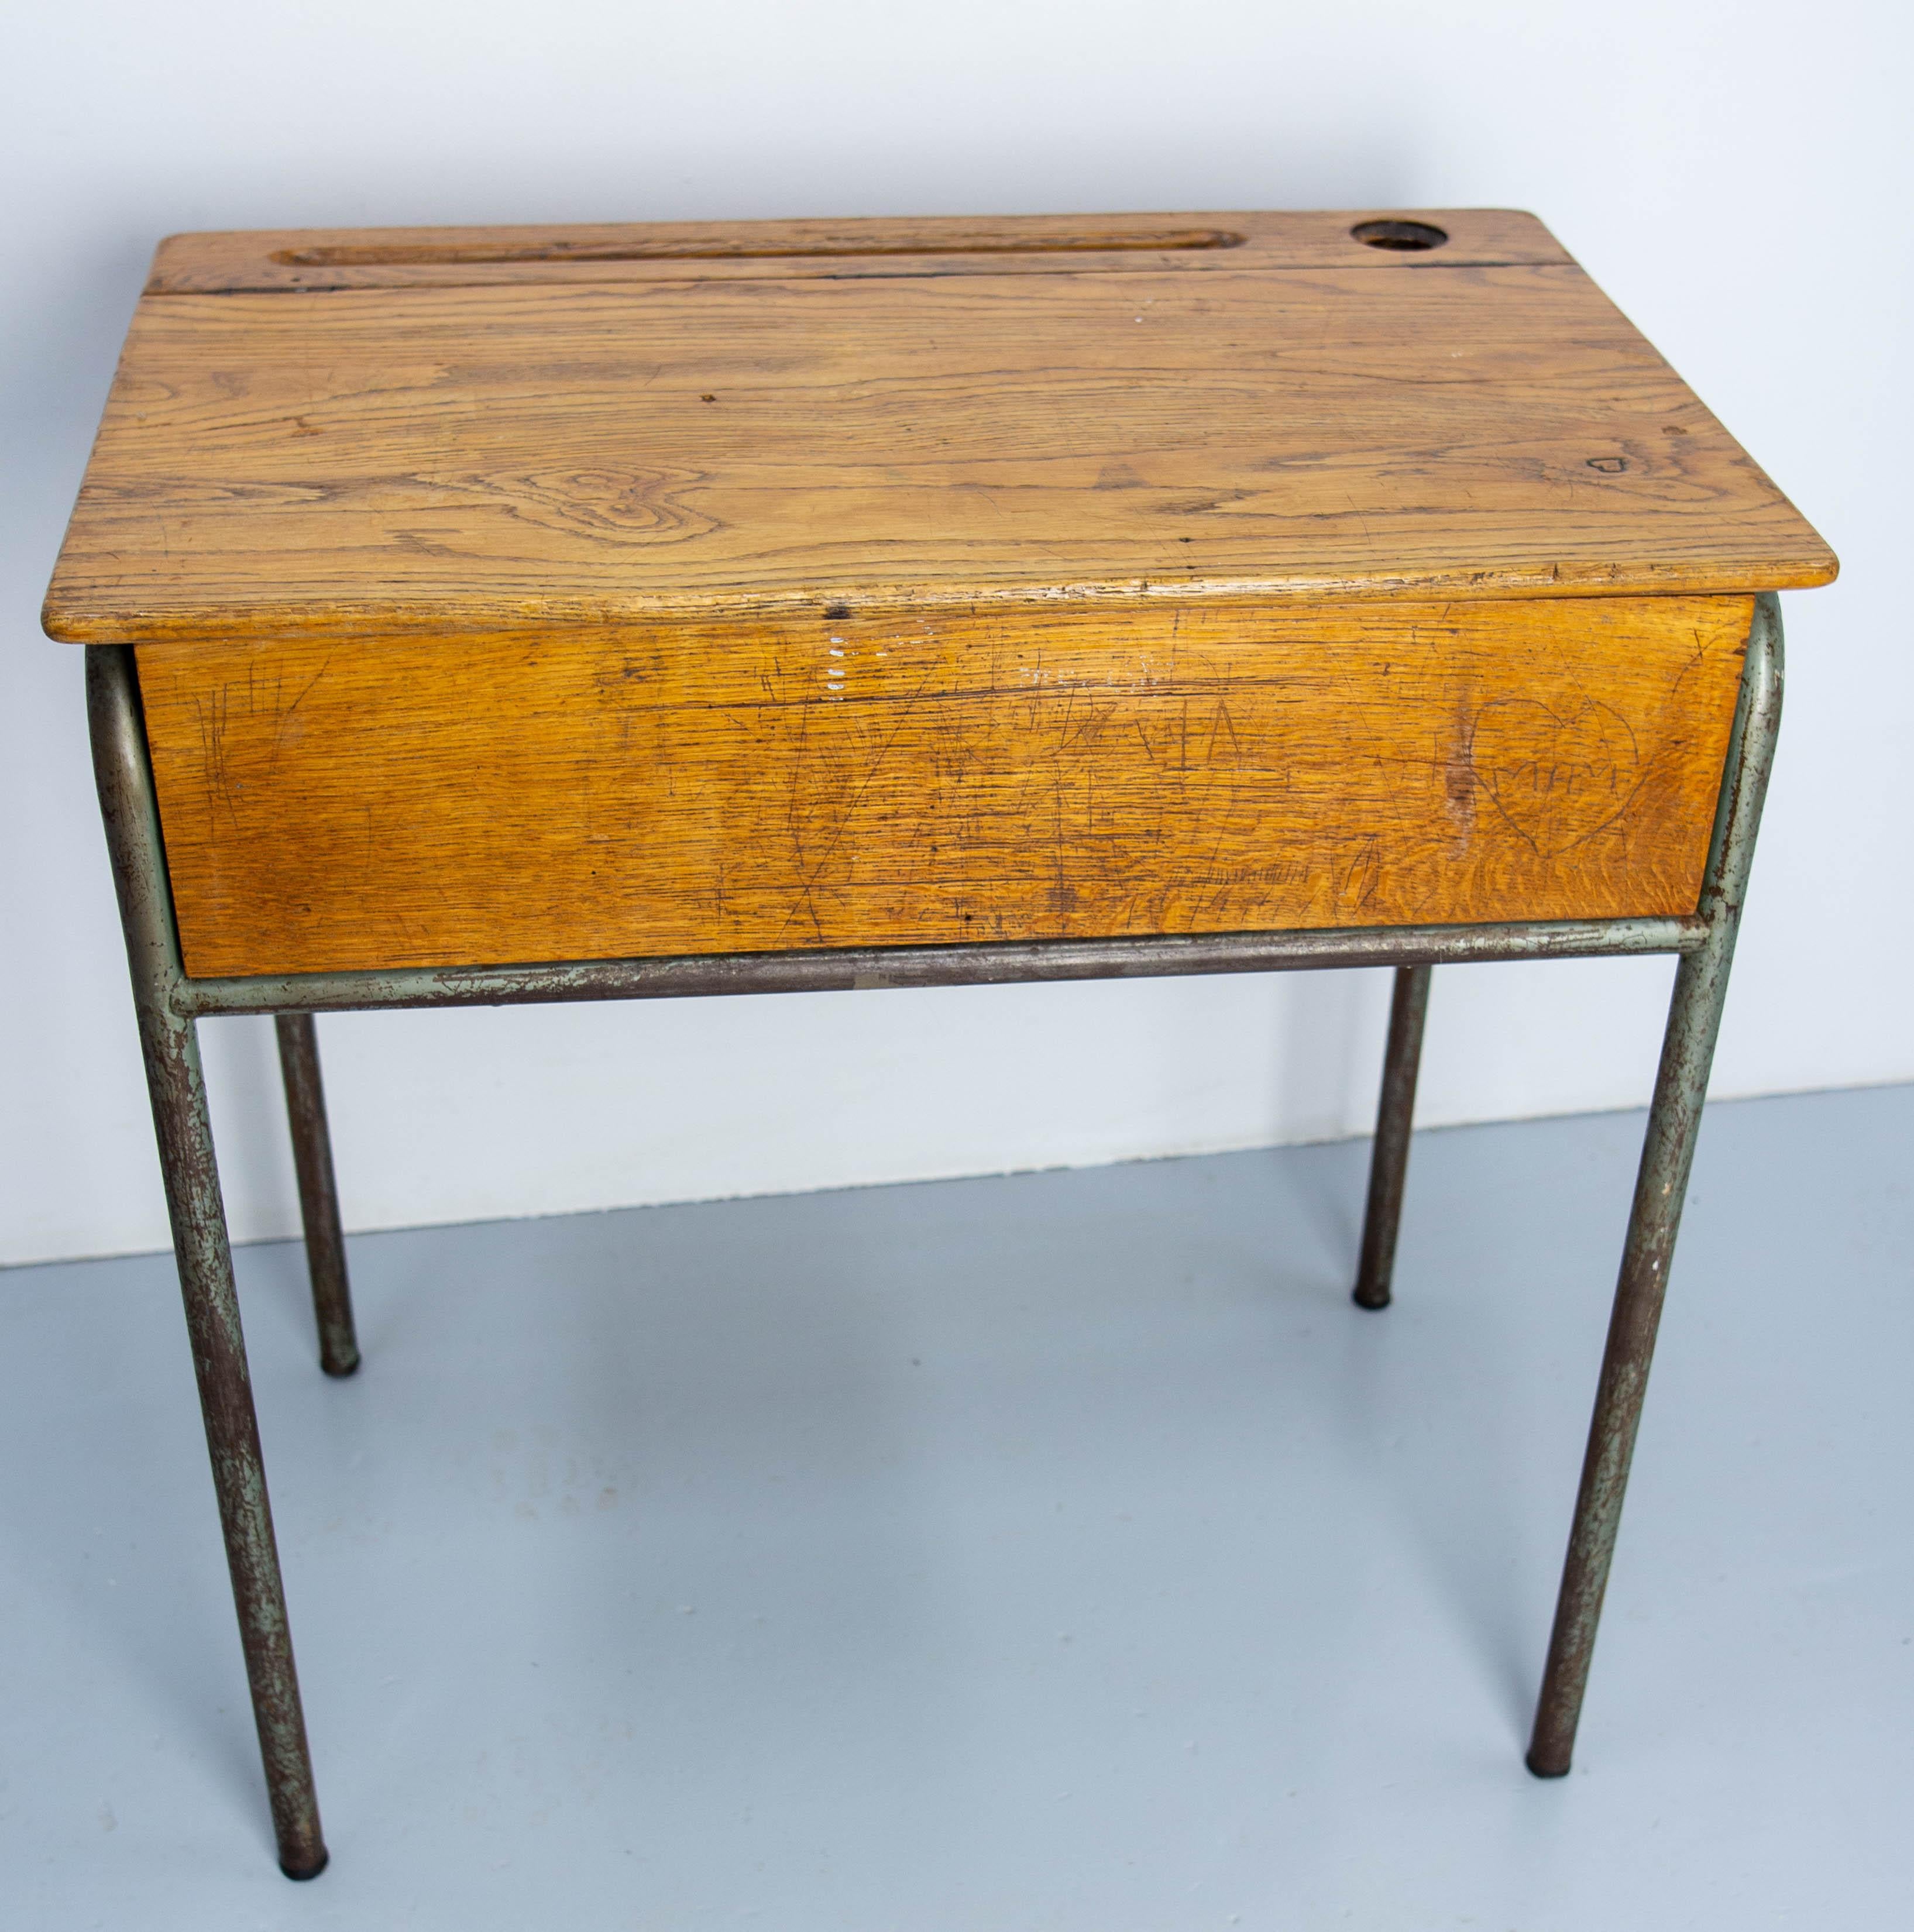 French slant top desk writing table for student, circa 1950.
Oak and iron pupitre 
Good vintage condition with nice patina.
Authentic condition with engraved marks made by the students during lessons!

Shipping:
48 / 77 / 75 cm 14.8 kg